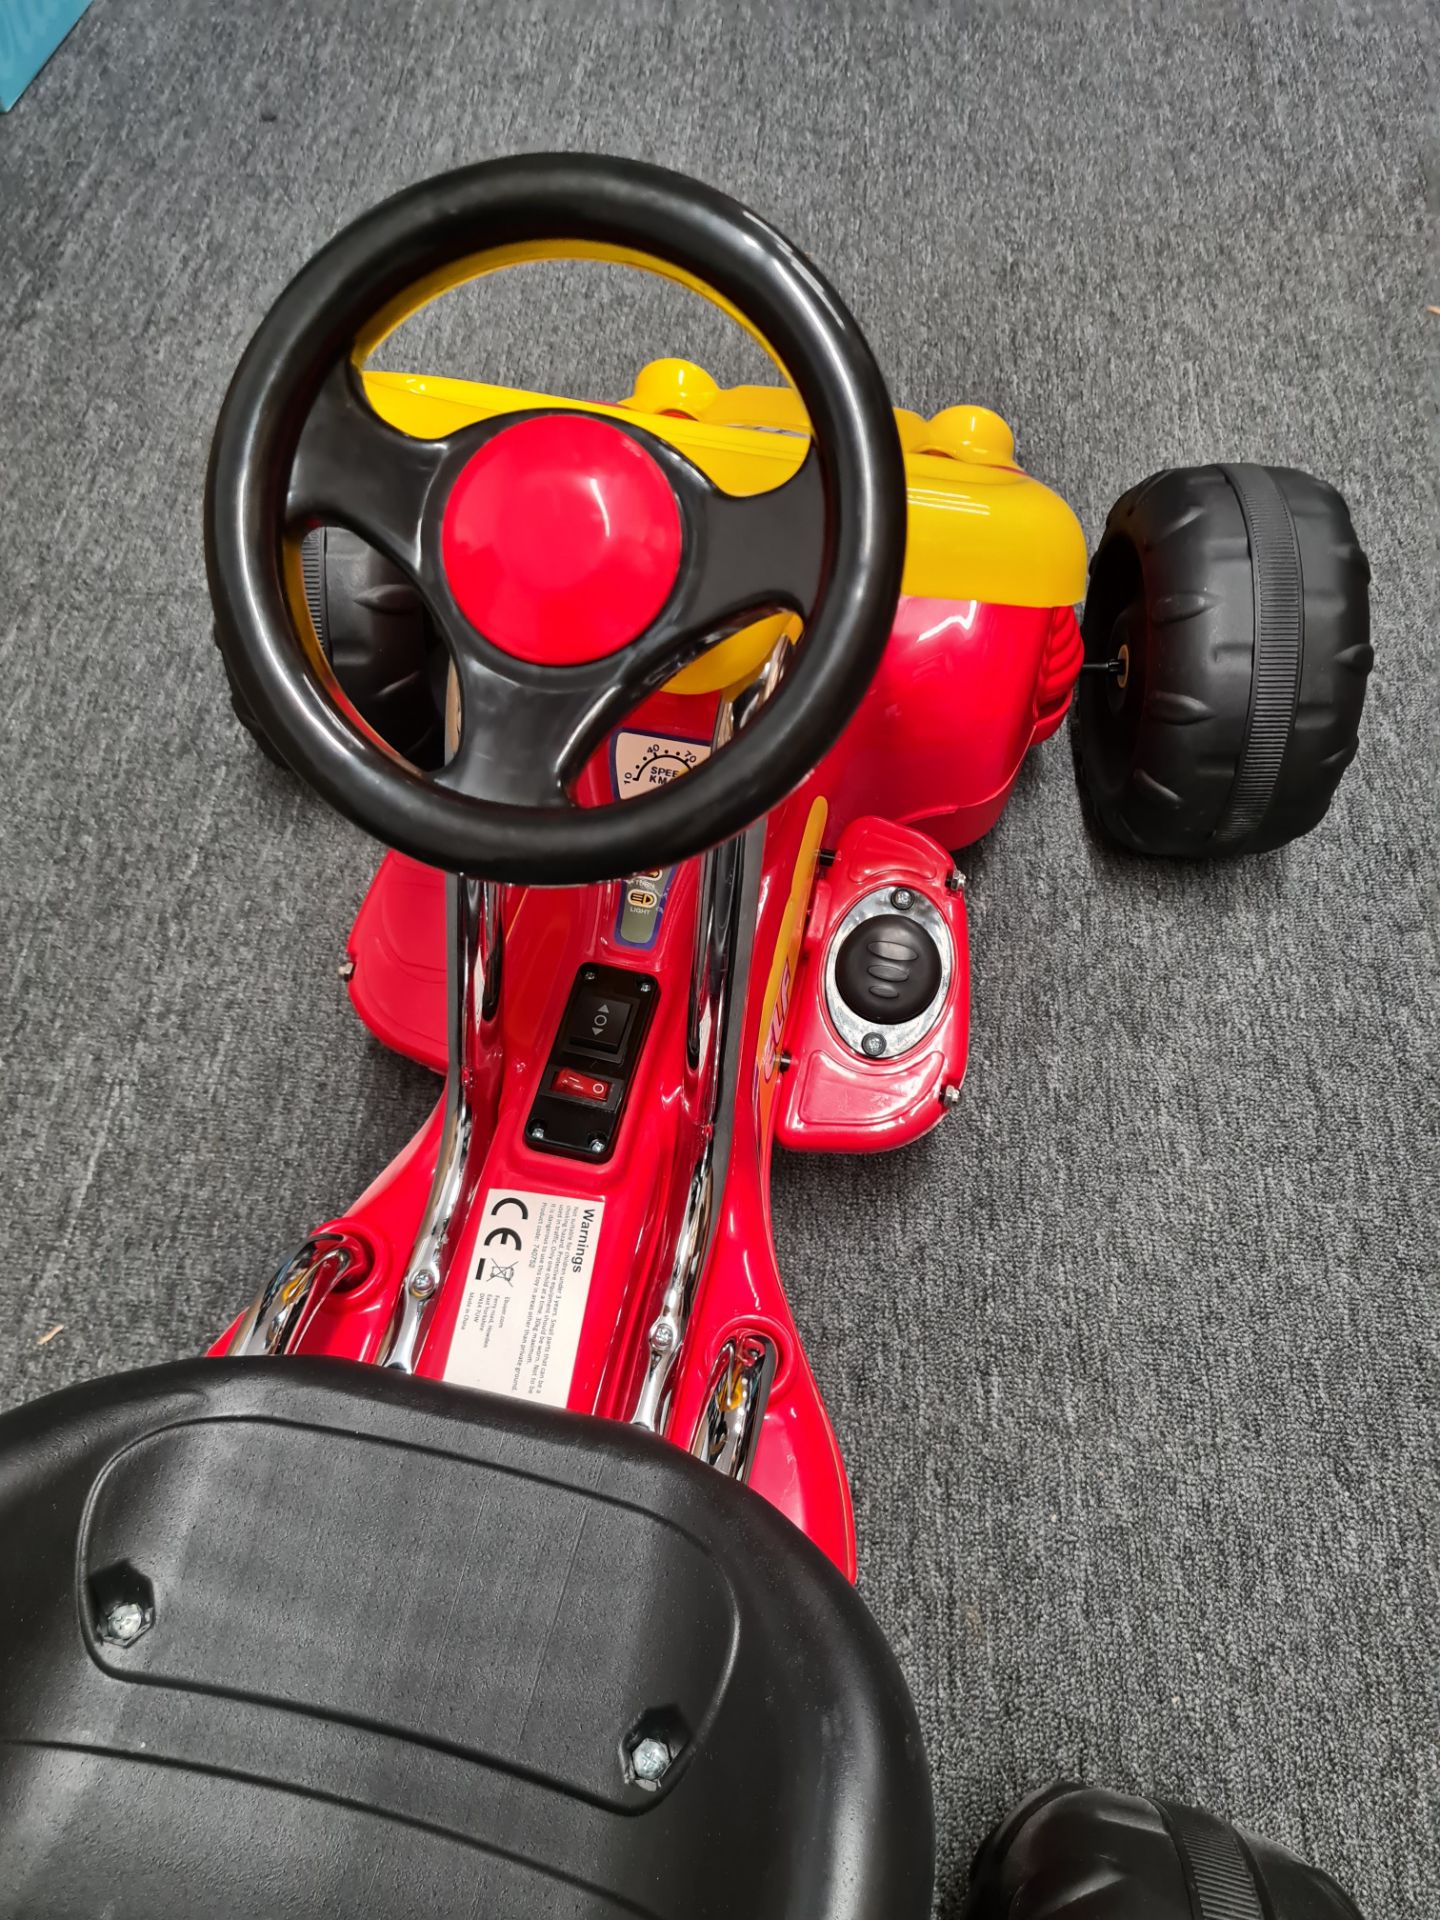 10 X ELECTRIC 6V RIDE ON GO KART - RED / YELLOW £1500 - BRAND NEW FOR KIDS - Image 3 of 10